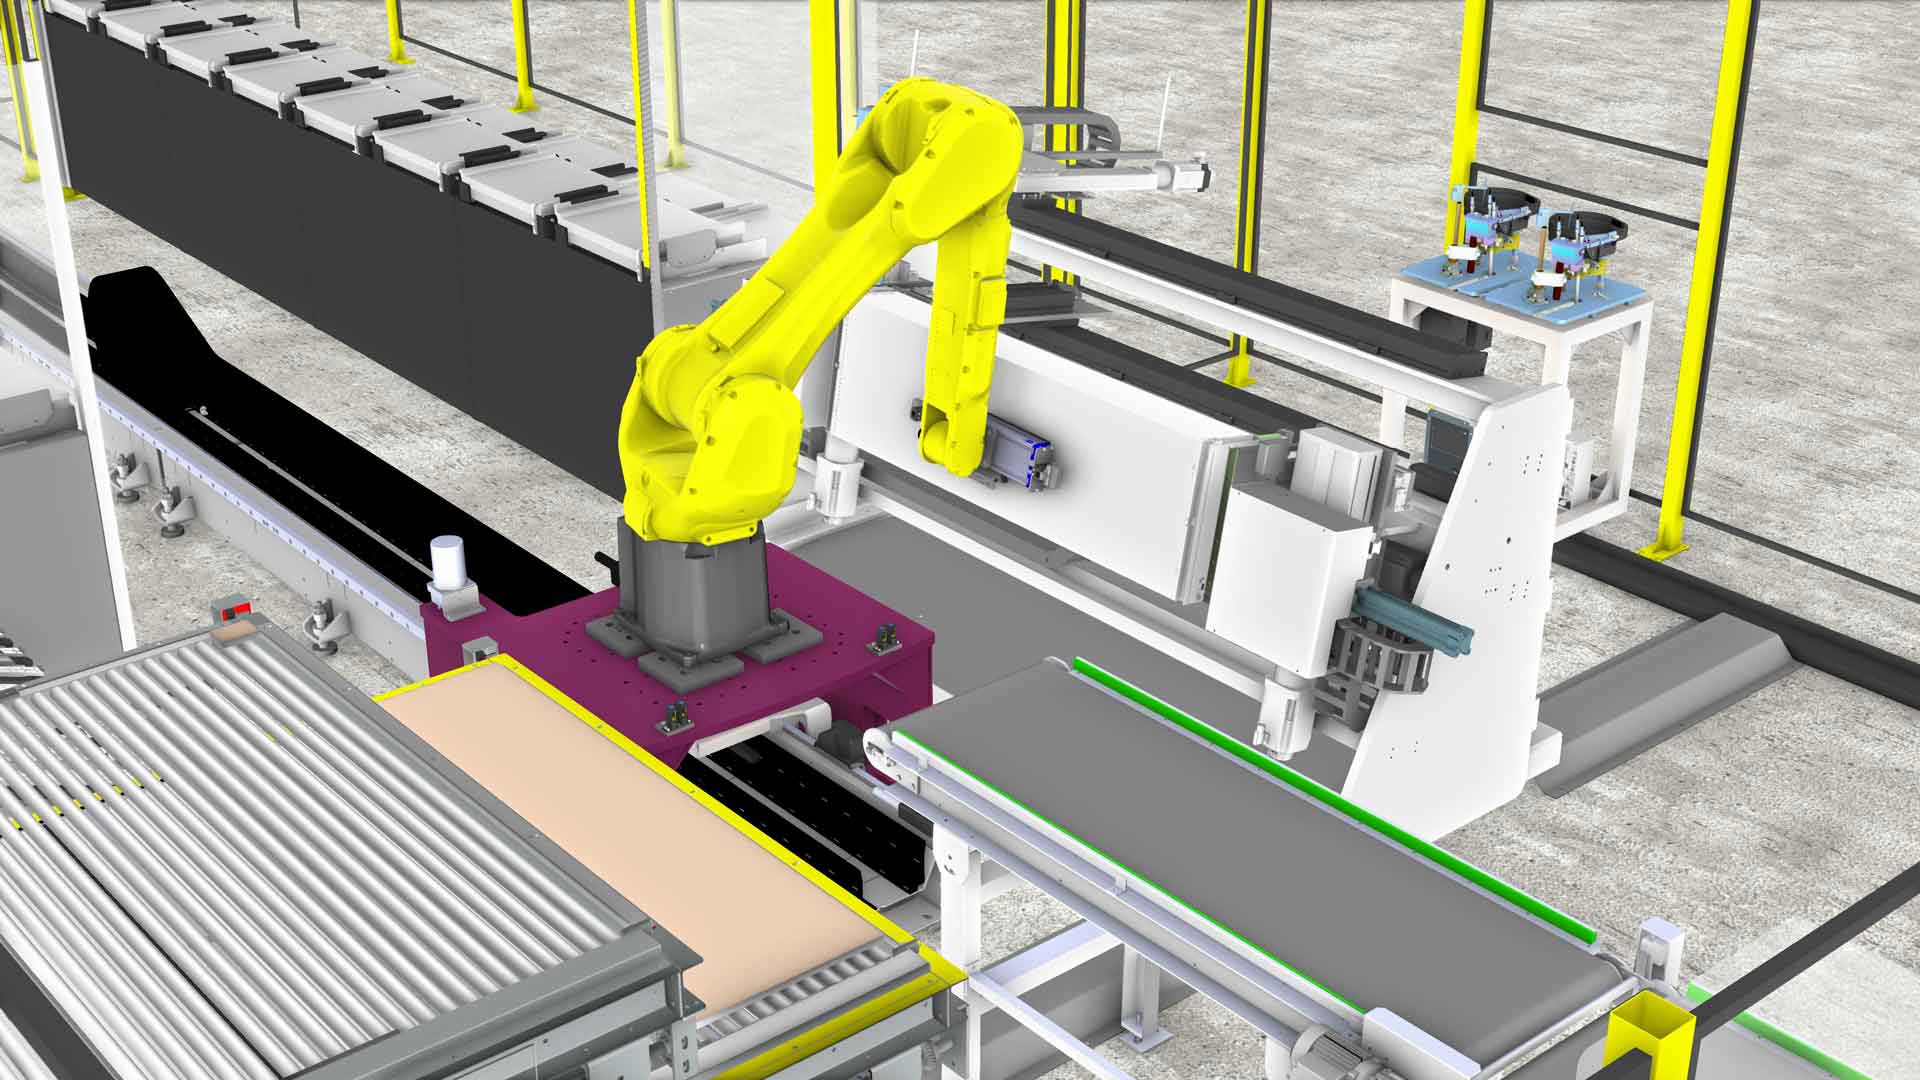 a rendering of a robot working at a manufacturing line